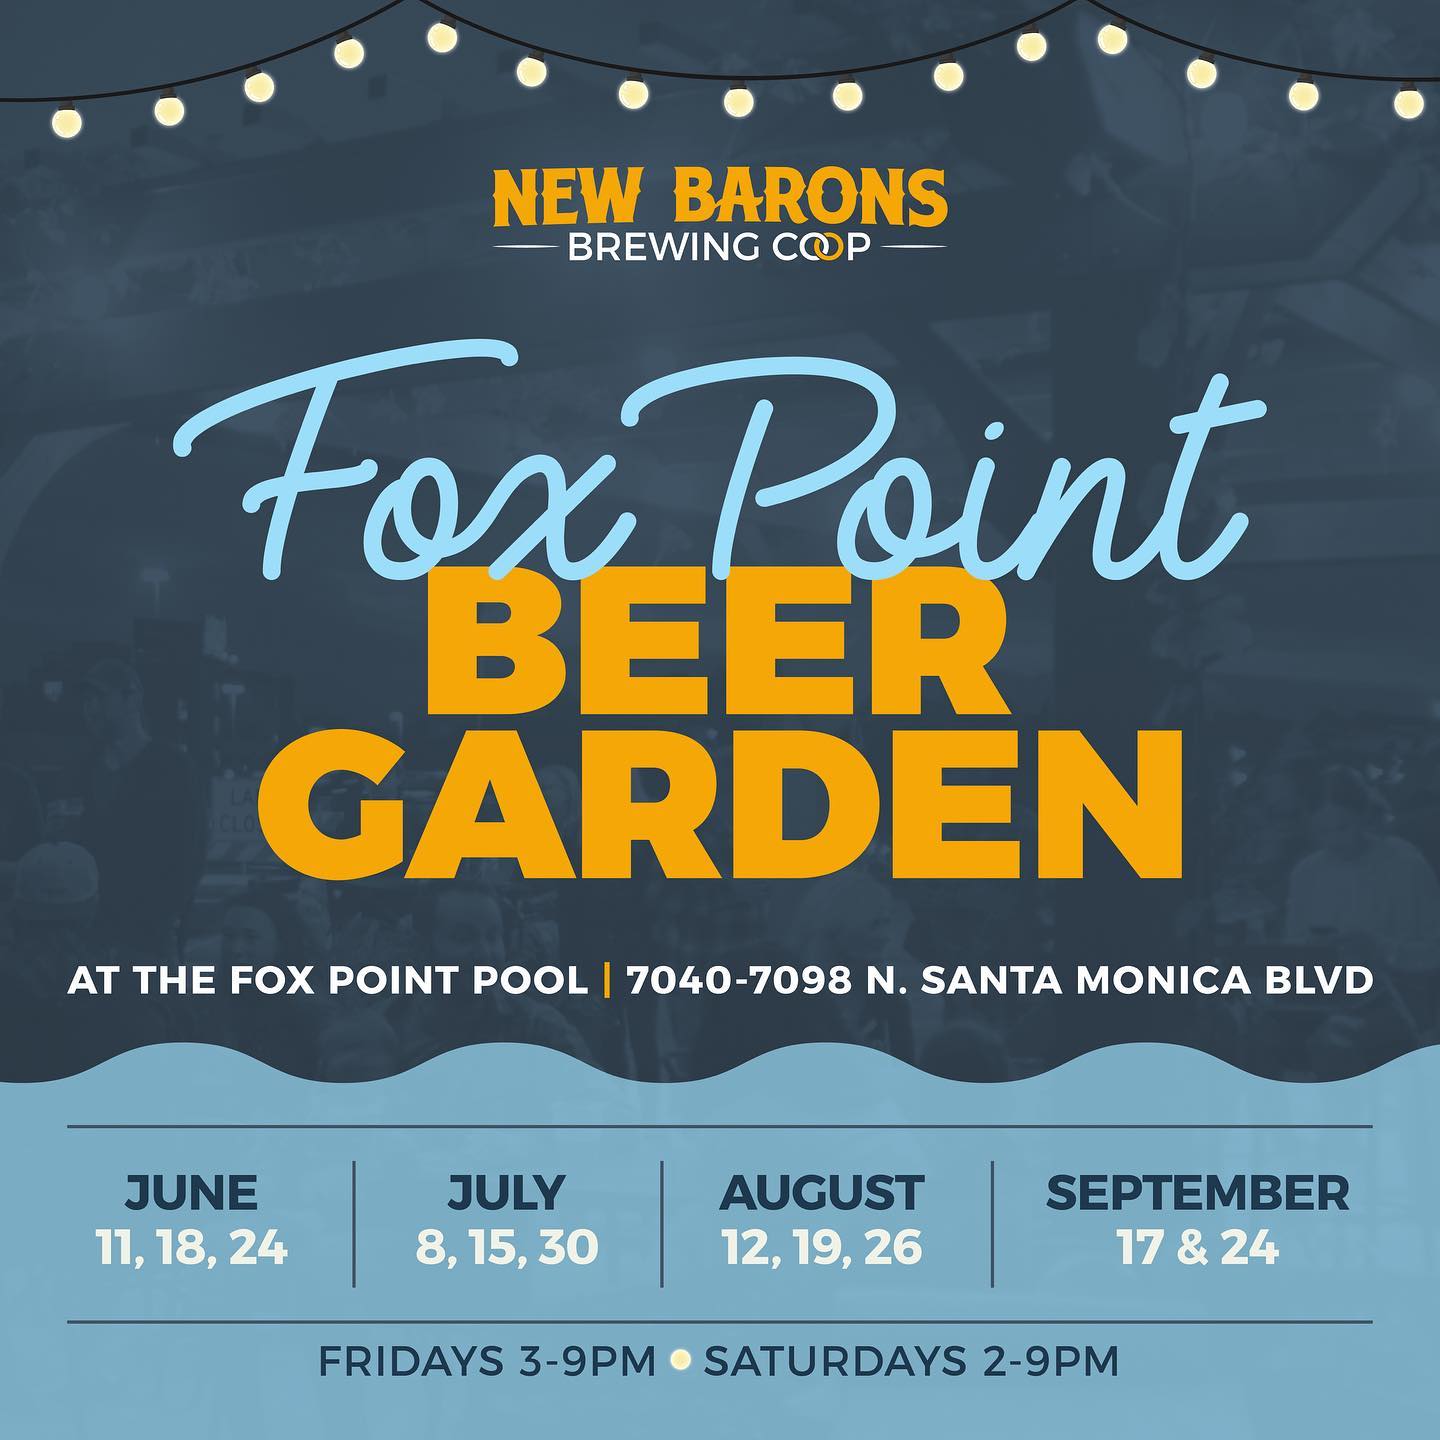 🍻Introducing, the New Barons Brewing Fox Point Beer Garden🎉

We are very excited to announce that this summer, we will have a series of beer gardens between June and September in Fox Point! The beer garden will be located in the area outside of the Fox Point Pool on Santa Monica Blvd. We will be open 11 evenings this summer and can’t wait to kick off the party on Saturday, June 11th! Which dates will you be stopping by?!
.
Open on Fridays 3pm-9pm & Saturdays 2pm-9pm
.
🍺 Saturday June 11 (Season Opener!)
🍺 Saturday June 18
🍺 Friday June 24
🍺 Friday July 8
🍺 Friday July 15
🍺 Saturday July 30
🍺 Friday August 12
🍺 Friday August 19
🍺 Friday August 26
🍺 Saturday September 17
🍺 Saturday September 24